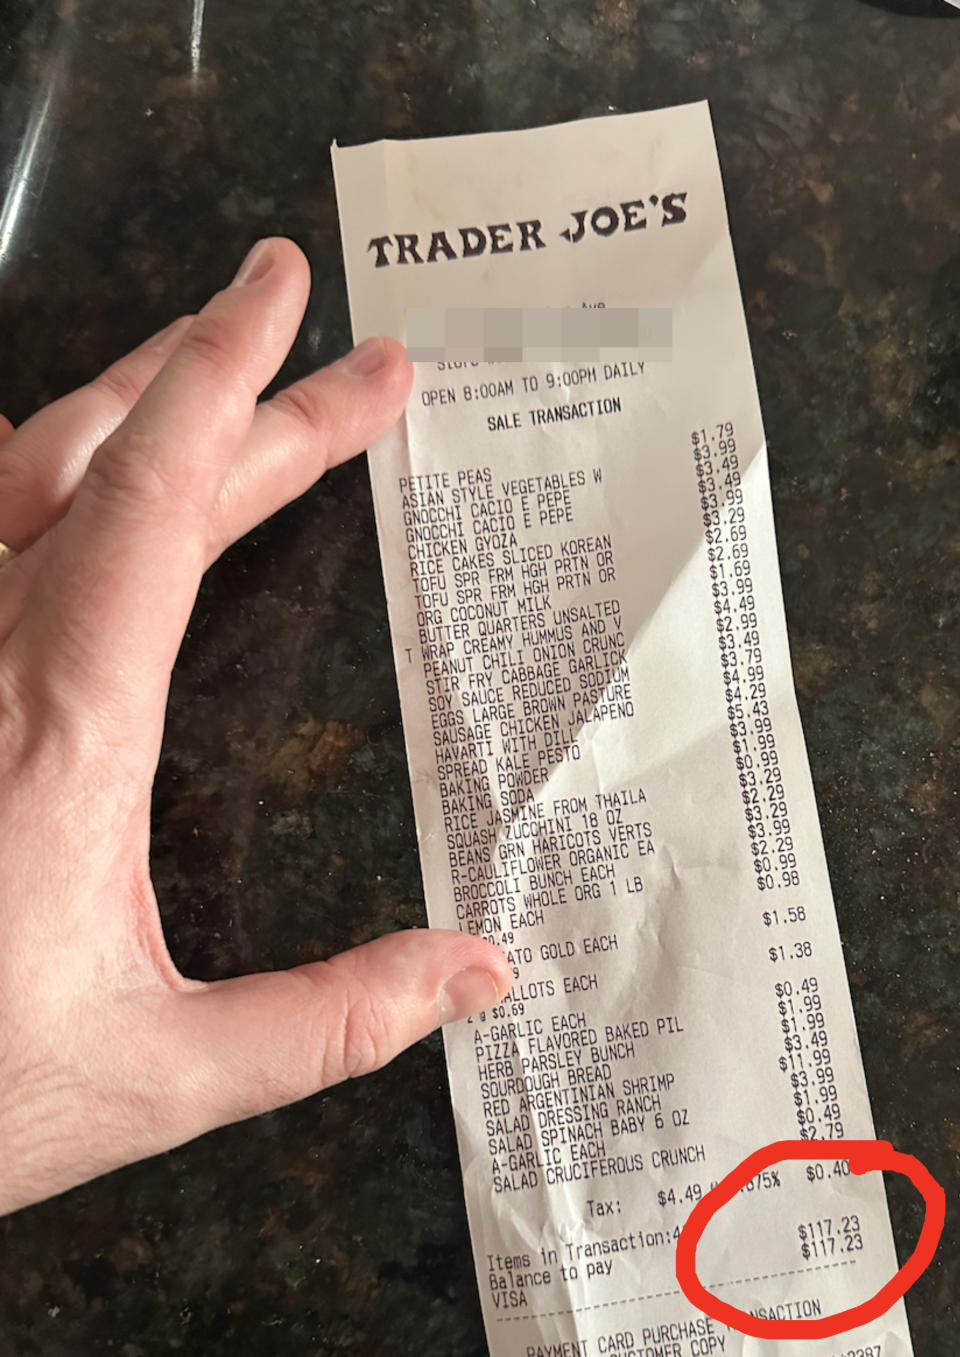 Hand holding a Trader Joe's receipt listing various grocery items and their prices, with a total of $117.43 at the bottom